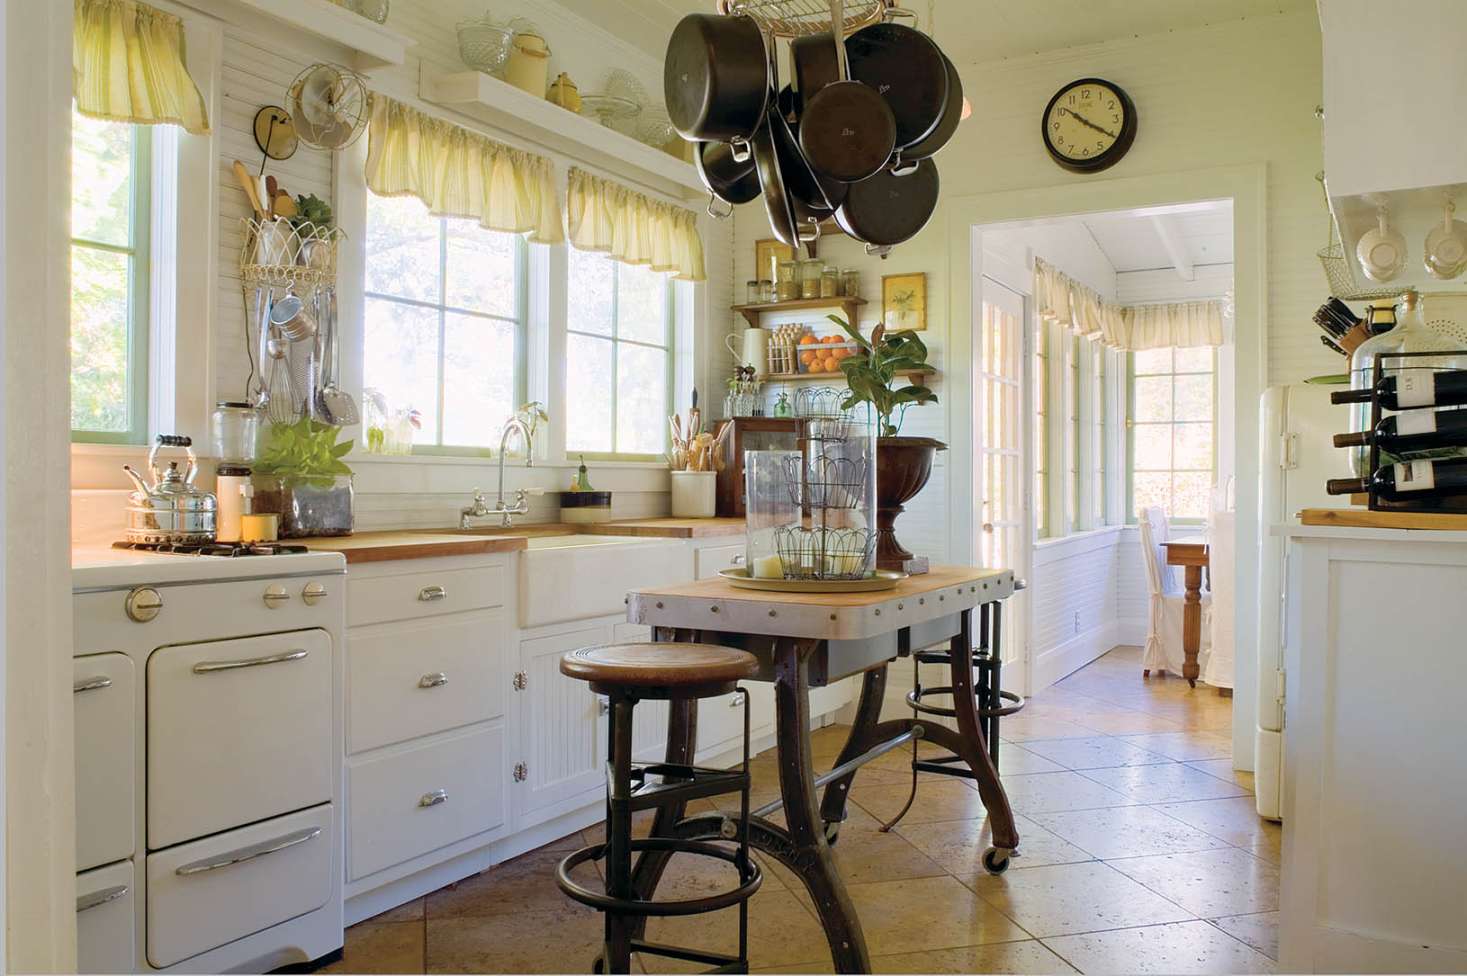 Bungalow Kitchens: Changing With The Times  American Bungalow